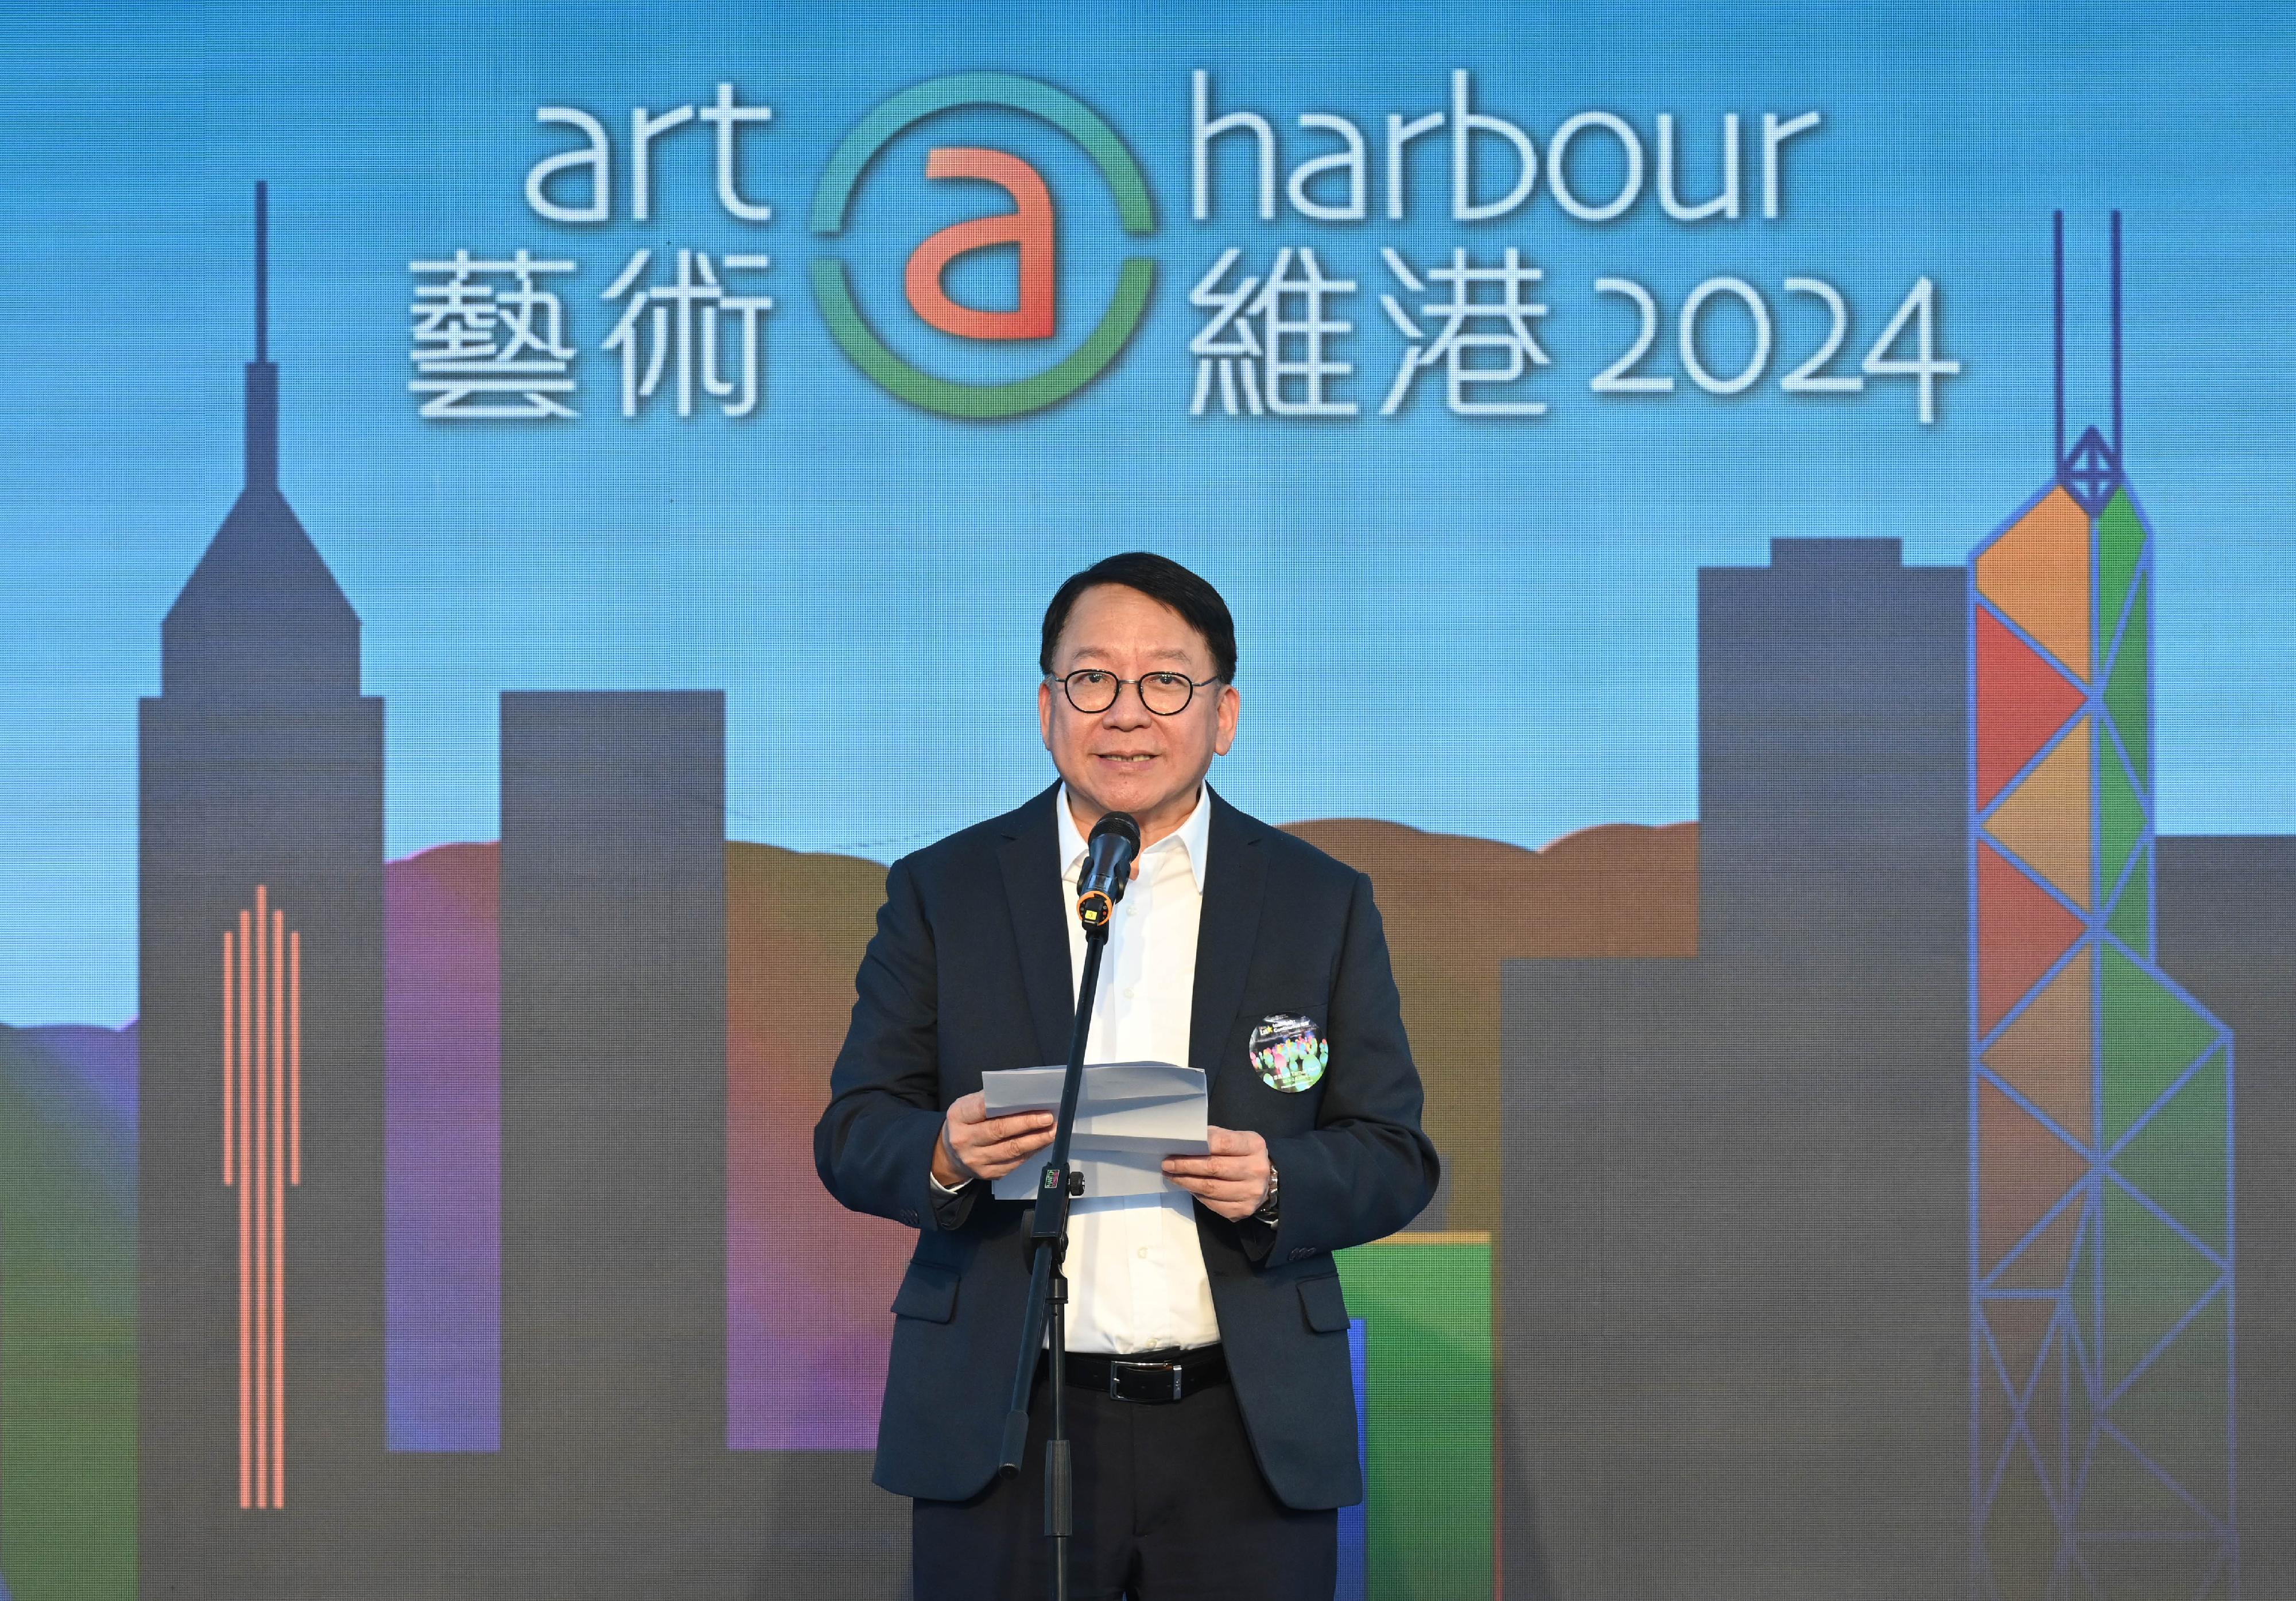 The Chief Secretary for Administration, Mr Chan Kwok-ki, speaks at the opening ceremony of "Art@Harbour 2024" today (March 24).
